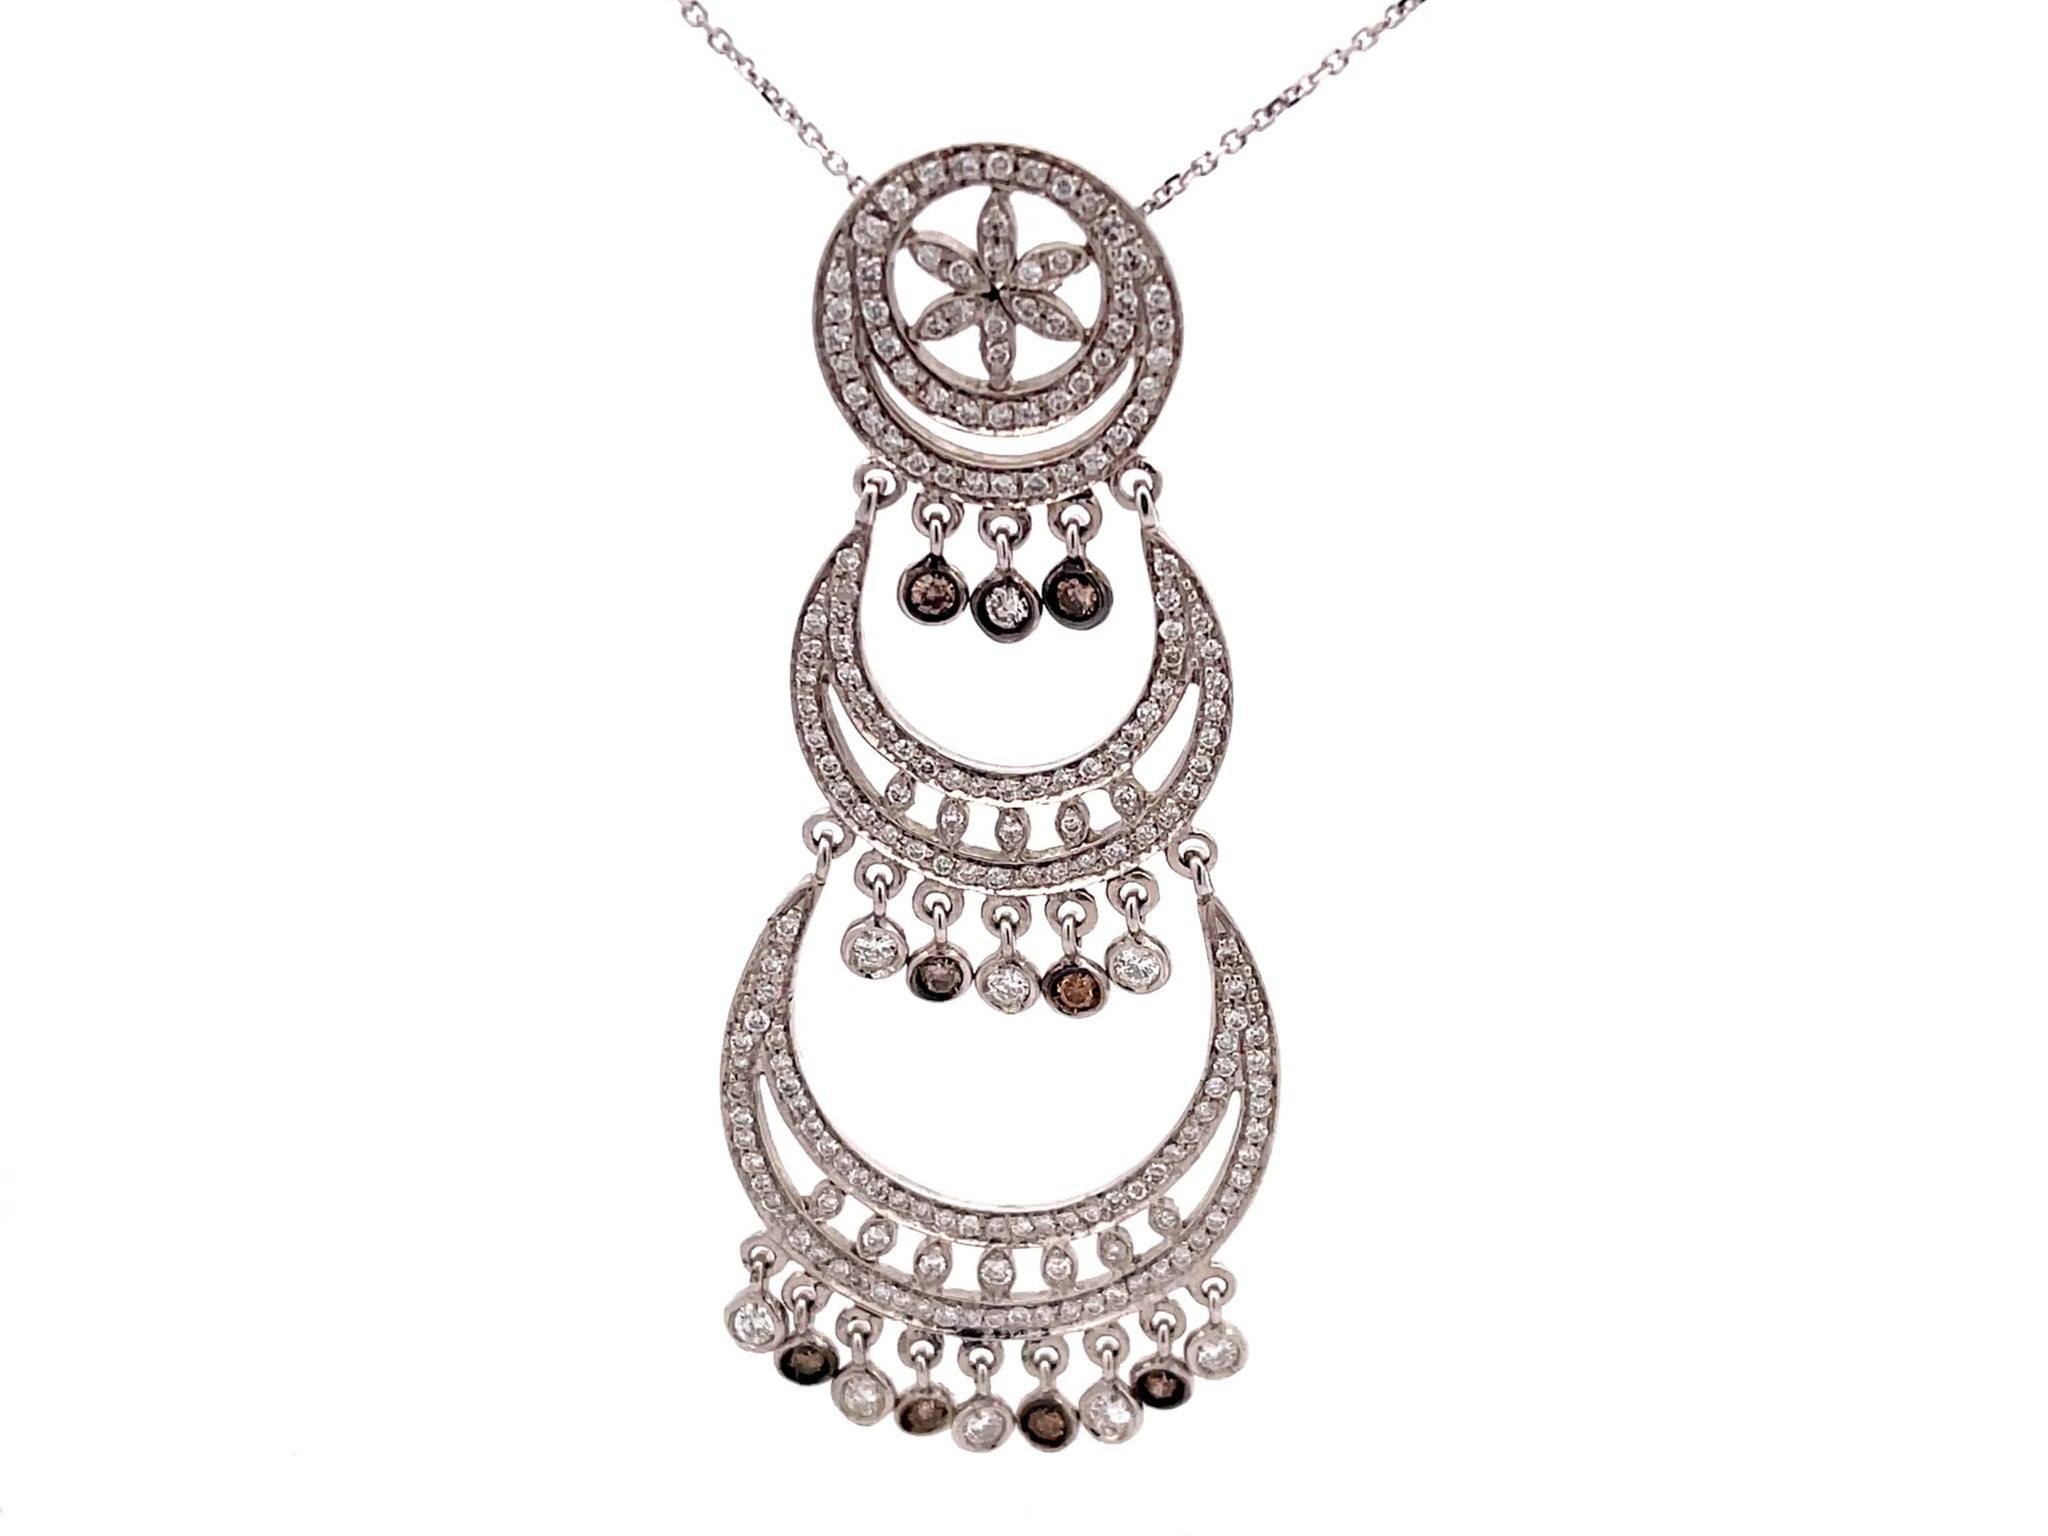 Large Drop Pendant with White and Chocolate Diamonds in 18k White Gold